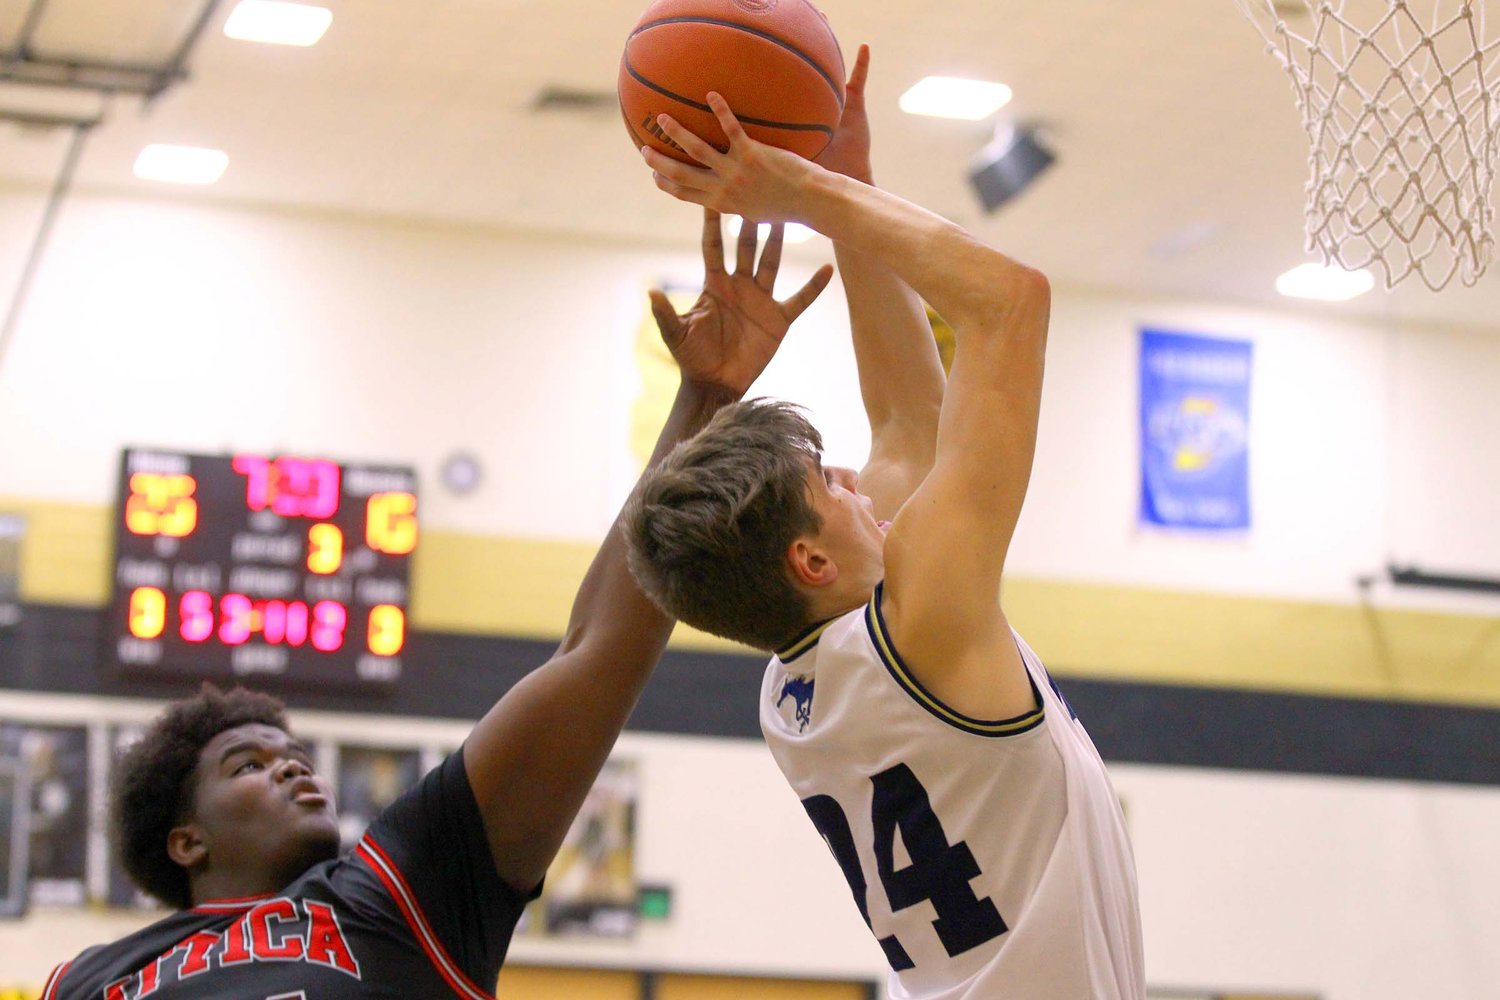 Isaac Gayler of Fountain Central shoots a lay-up after getting past Jamairie Johnson of Attica.